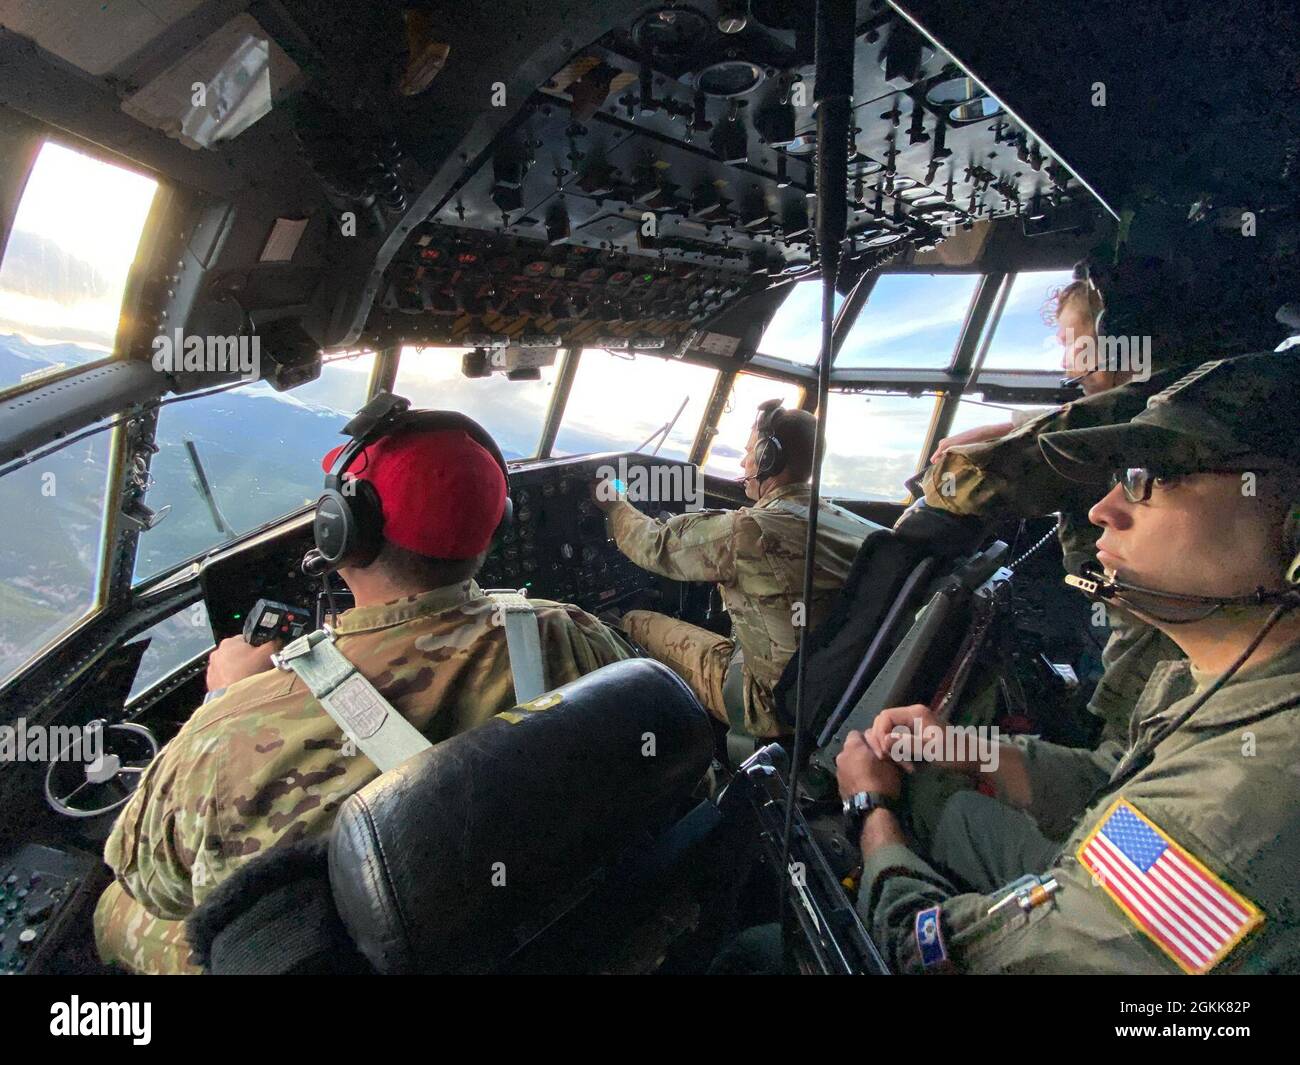 Maj. Tyler Brewer, (red hat) trains for his aircraft commander upgrade with Lt. Col. Jeremy Burton, MAFFS instructor pilot, (middle), Maj. Kevin Greenwood, MAFFS instructor navigator, (right rear), and TSgt. Ben Gonzales, flight engineer, (right front). The crew worked to attain certifications and upgrades as part of the annual aerial Wildland Firefighting (WFF) training and certification with the U.S. Department of Agriculture's Forest Service, using the USDA Forest Service-provided Modular Aerial Fire Fighting System (MAFFS) fixed aboard C-130 Hercules aircraft. Along with Colorado Springs' Stock Photo